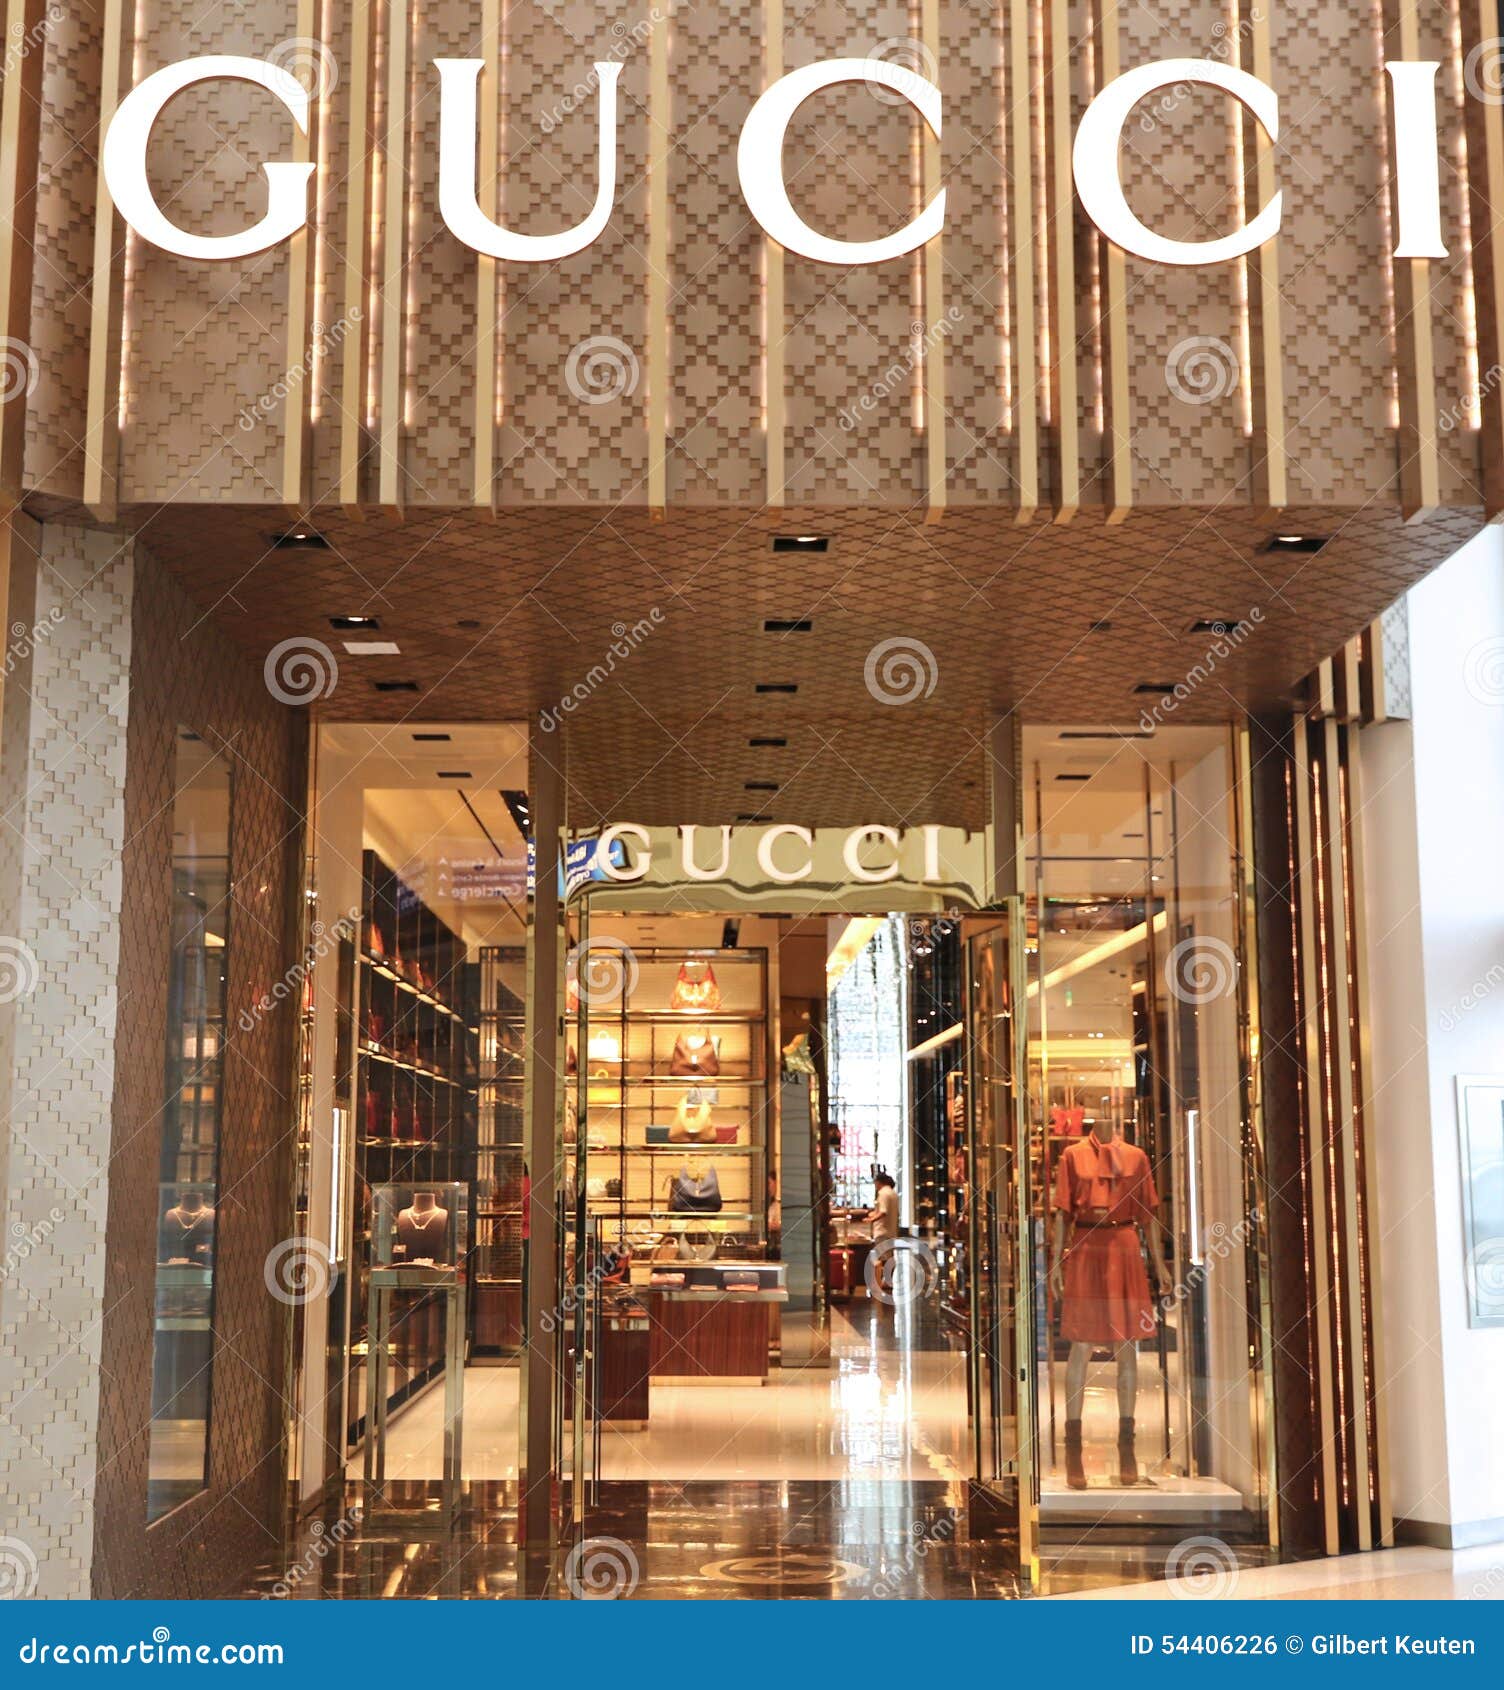 gucci store roosevelt field